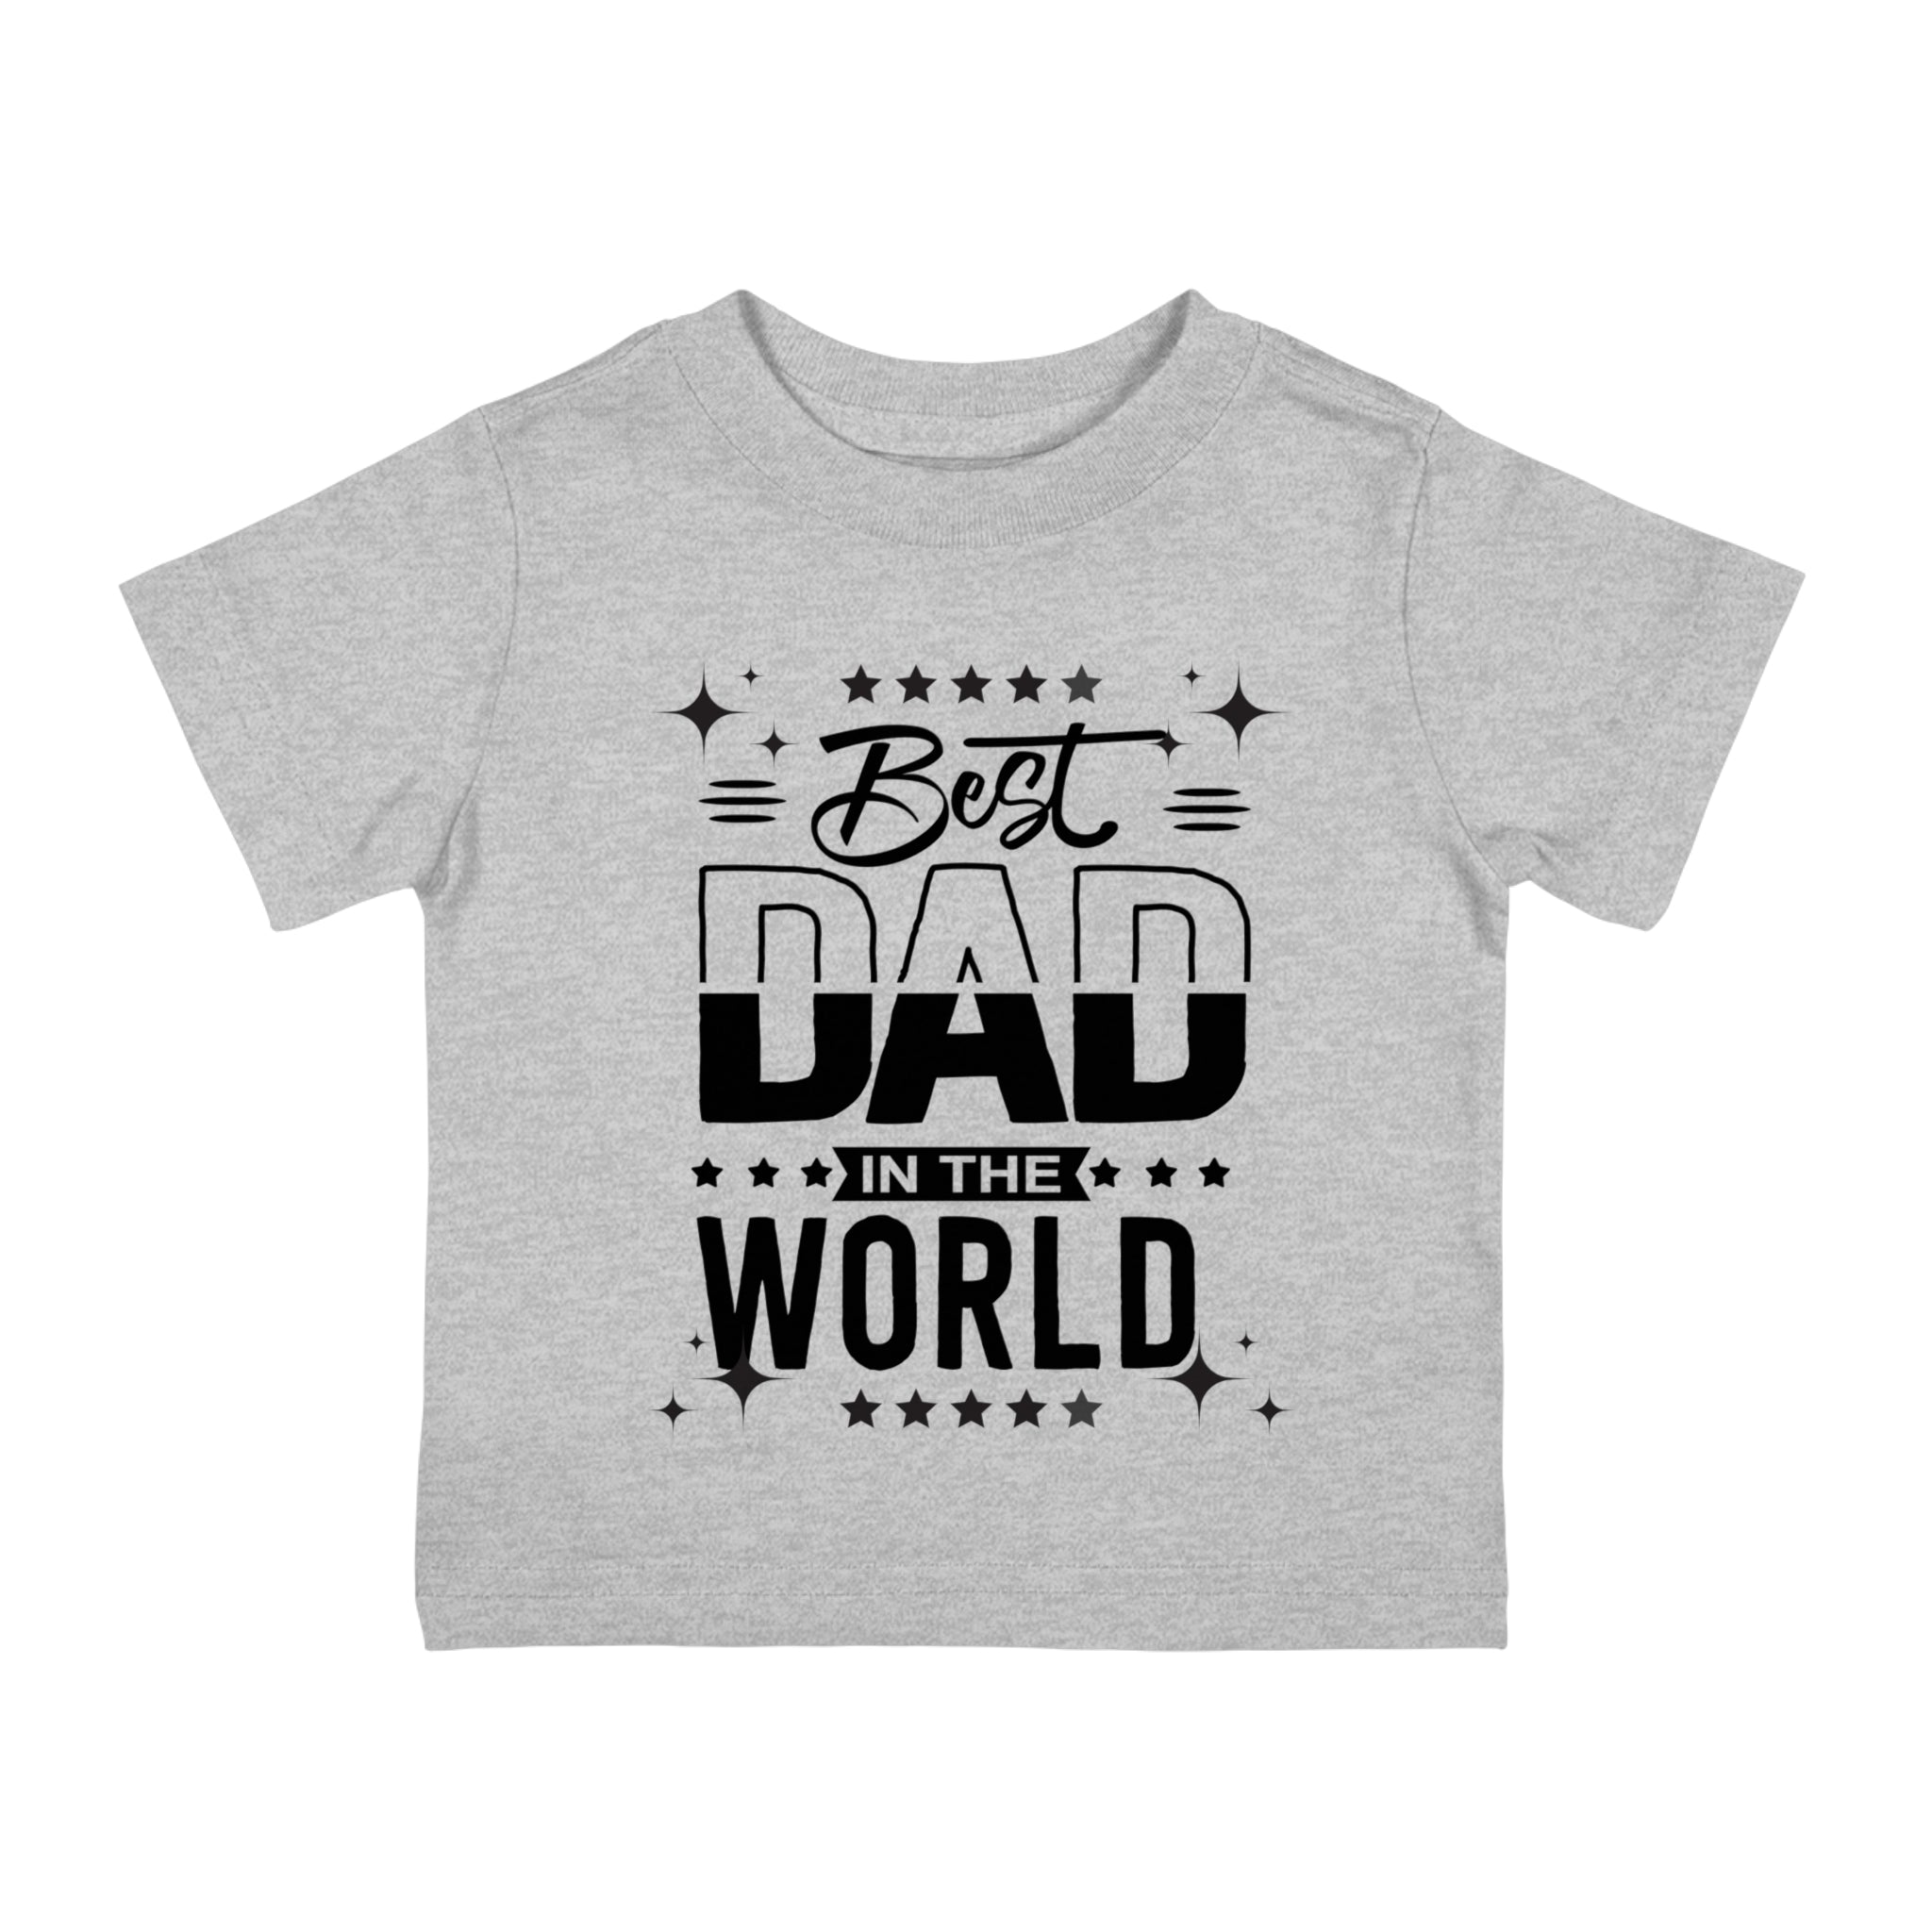 Best Dad In The World Infant Shirt, Baby Tee, Infant Tee